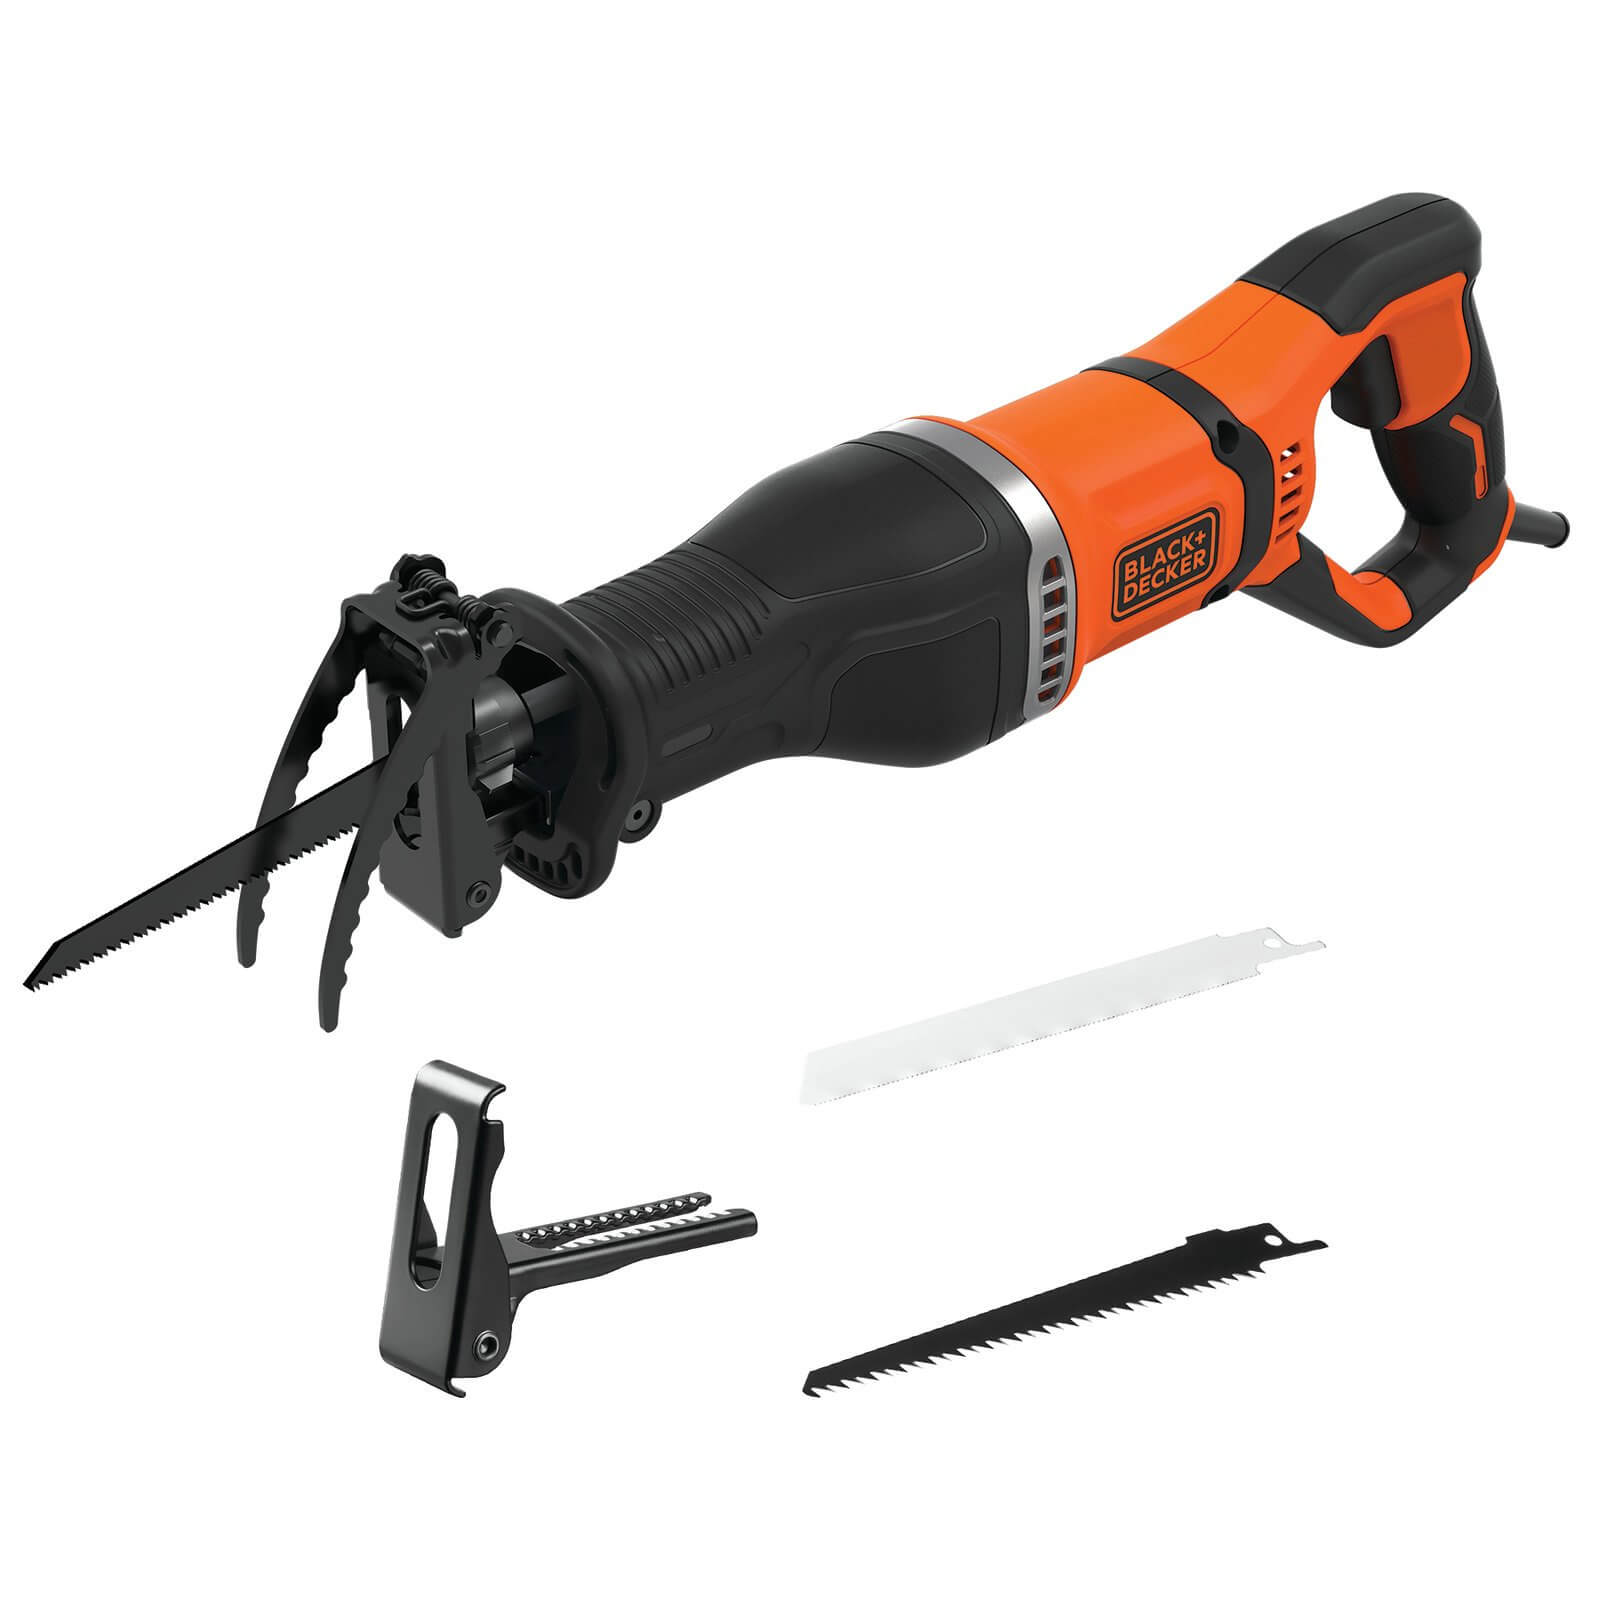 Photo of Black+decker 750w Corded Reciprocating Saw With Branch Holder And Blades -bes301-gb-